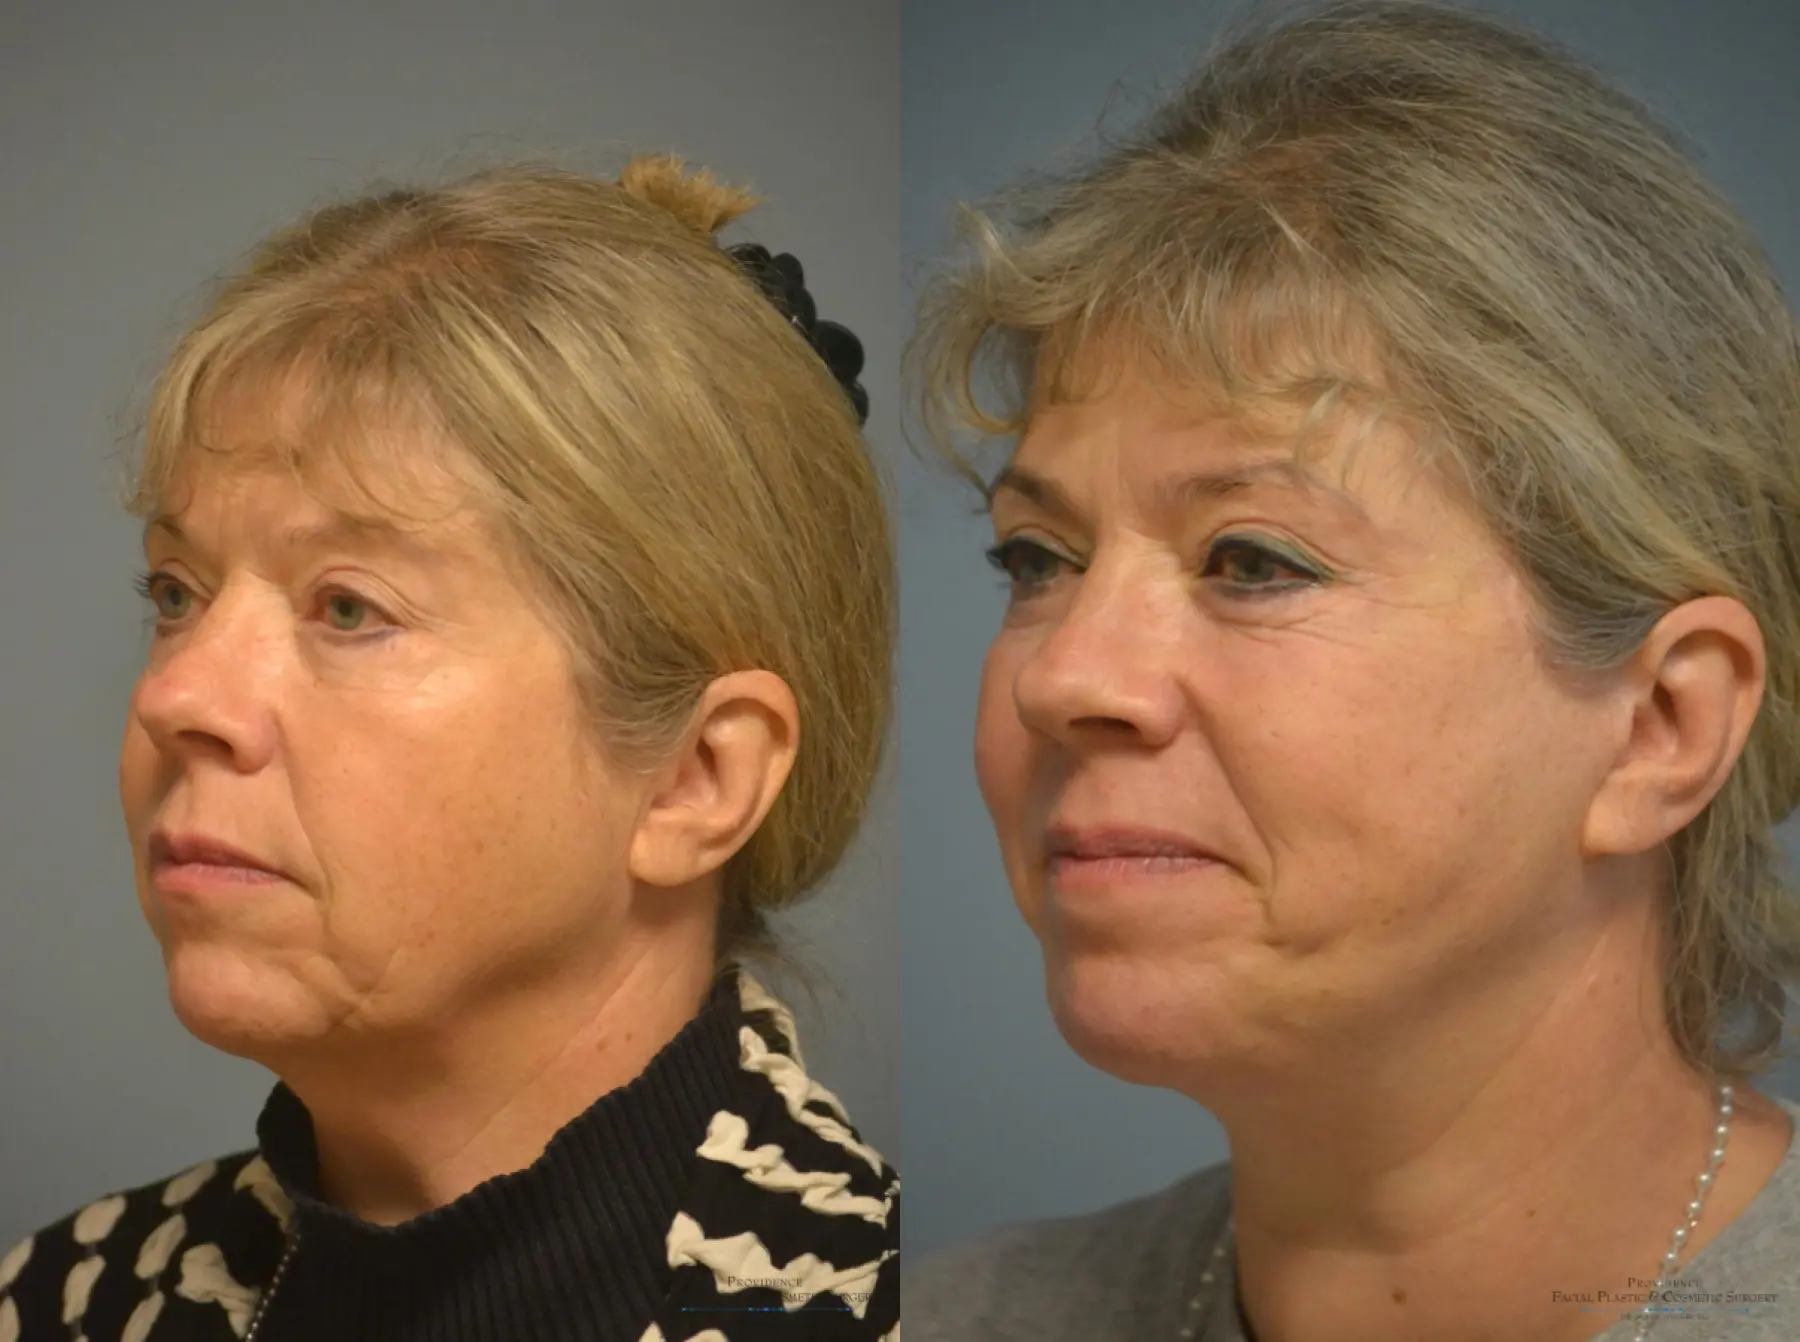 Facelift: Patient 1 - Before and After 3